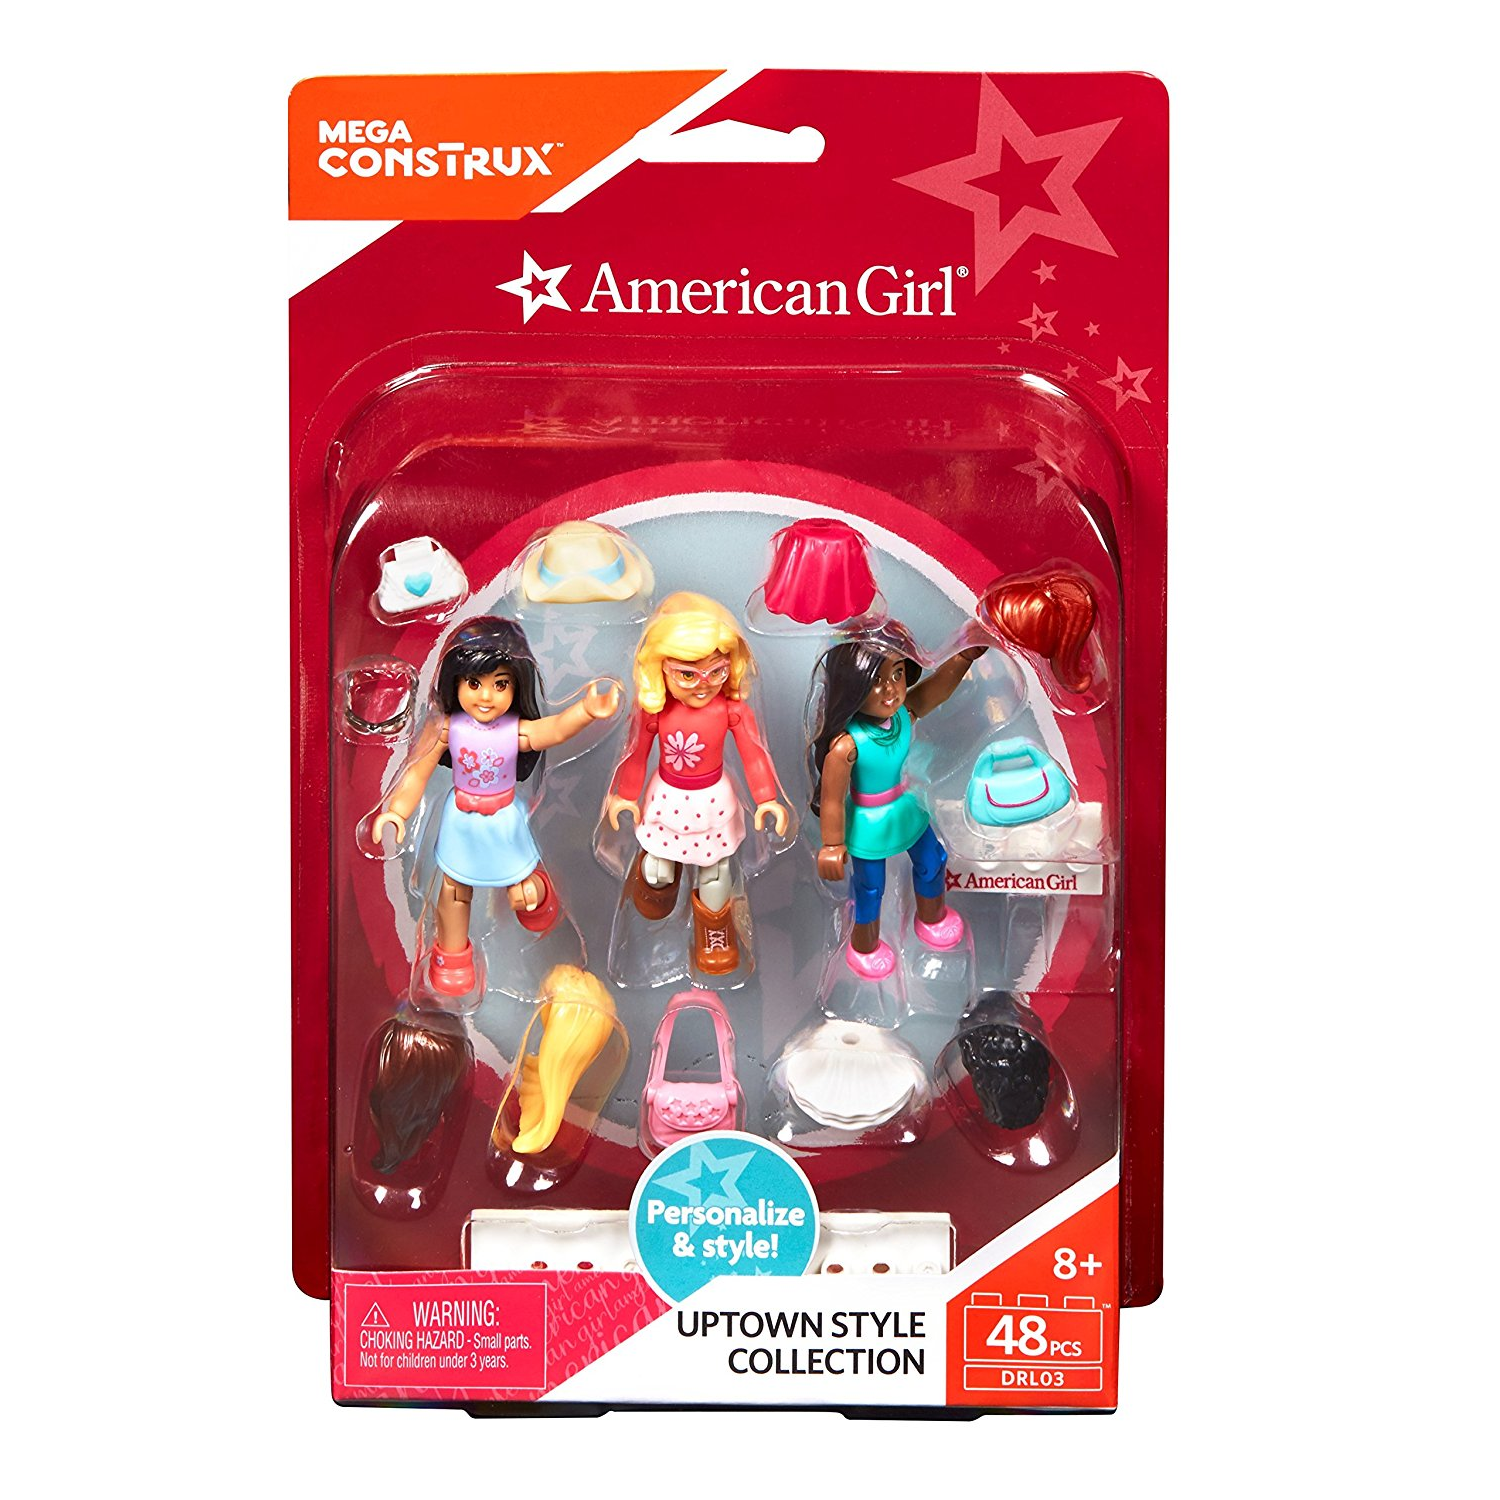 Mega Construx American Girl Figurine Uptown Style Collection Only $4.83! (Reg $14.99)